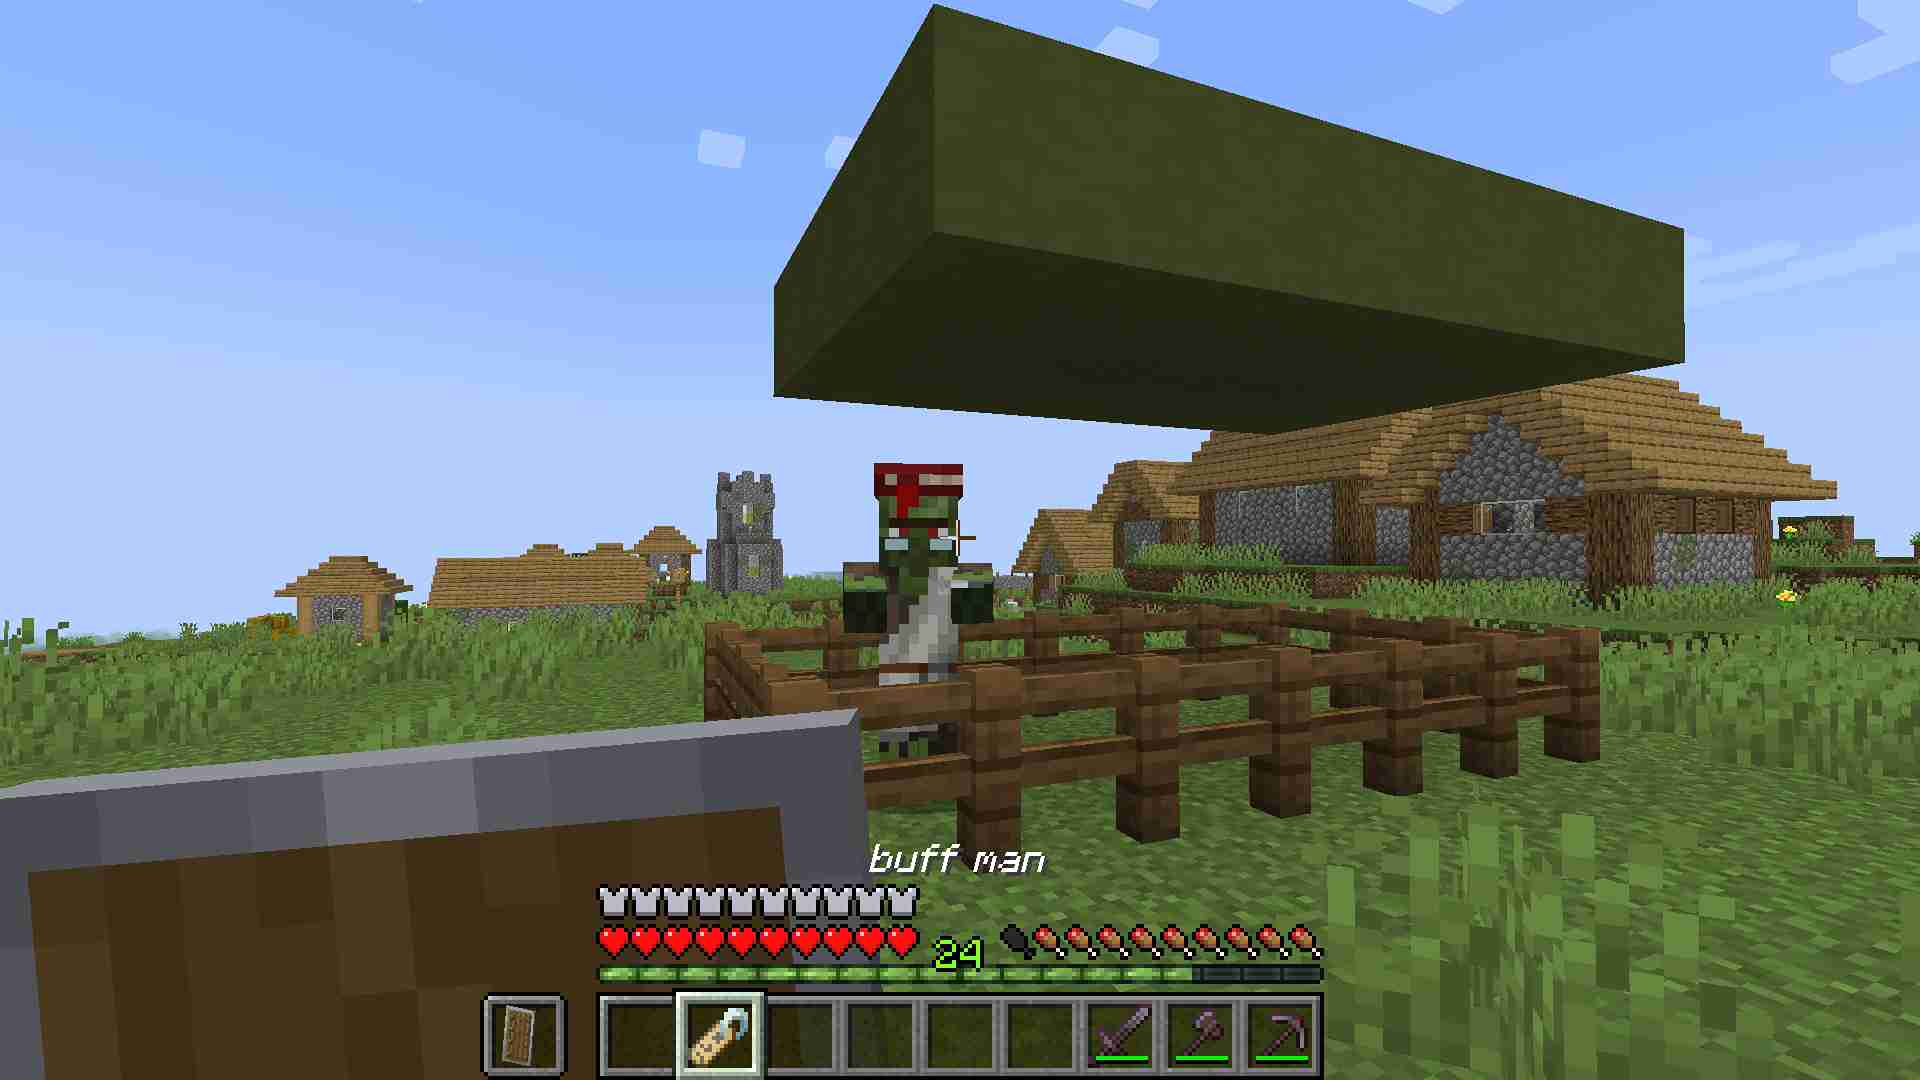 Image of a Villager Zombie in an enclosure with the player holding a nametag with the name "buff man".